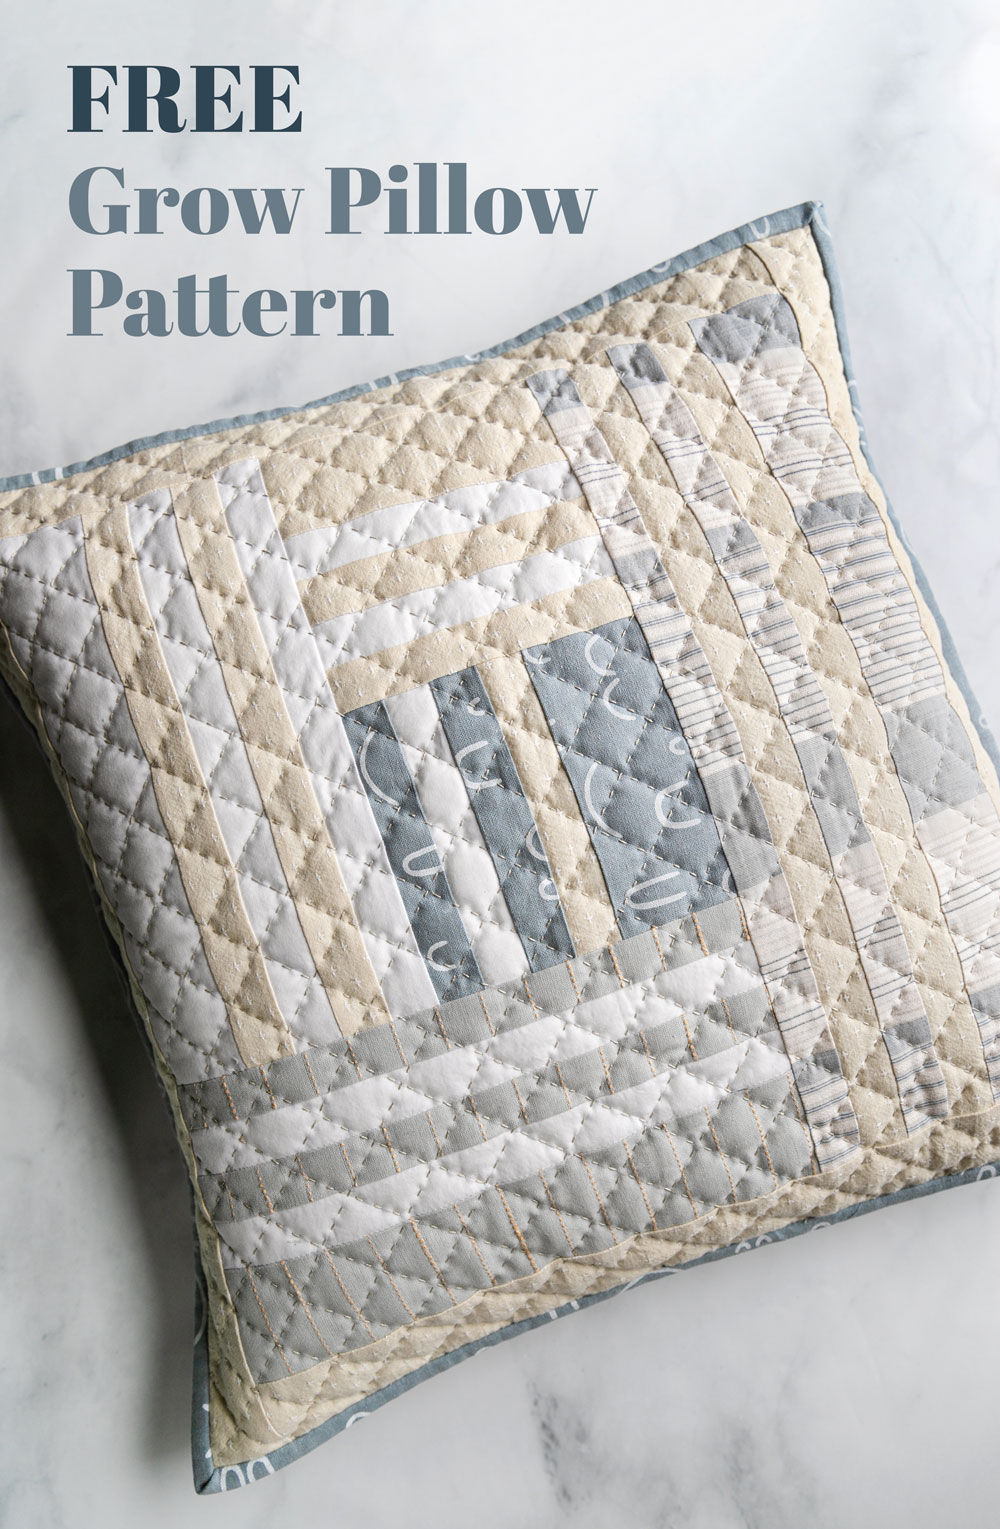 This FREE Grow pillow pattern gives you instructions to make a beautiful modern quilted pillow that finishes at 18-inches square. suzyquilts.com #quiltedpillow #freepillowpattern